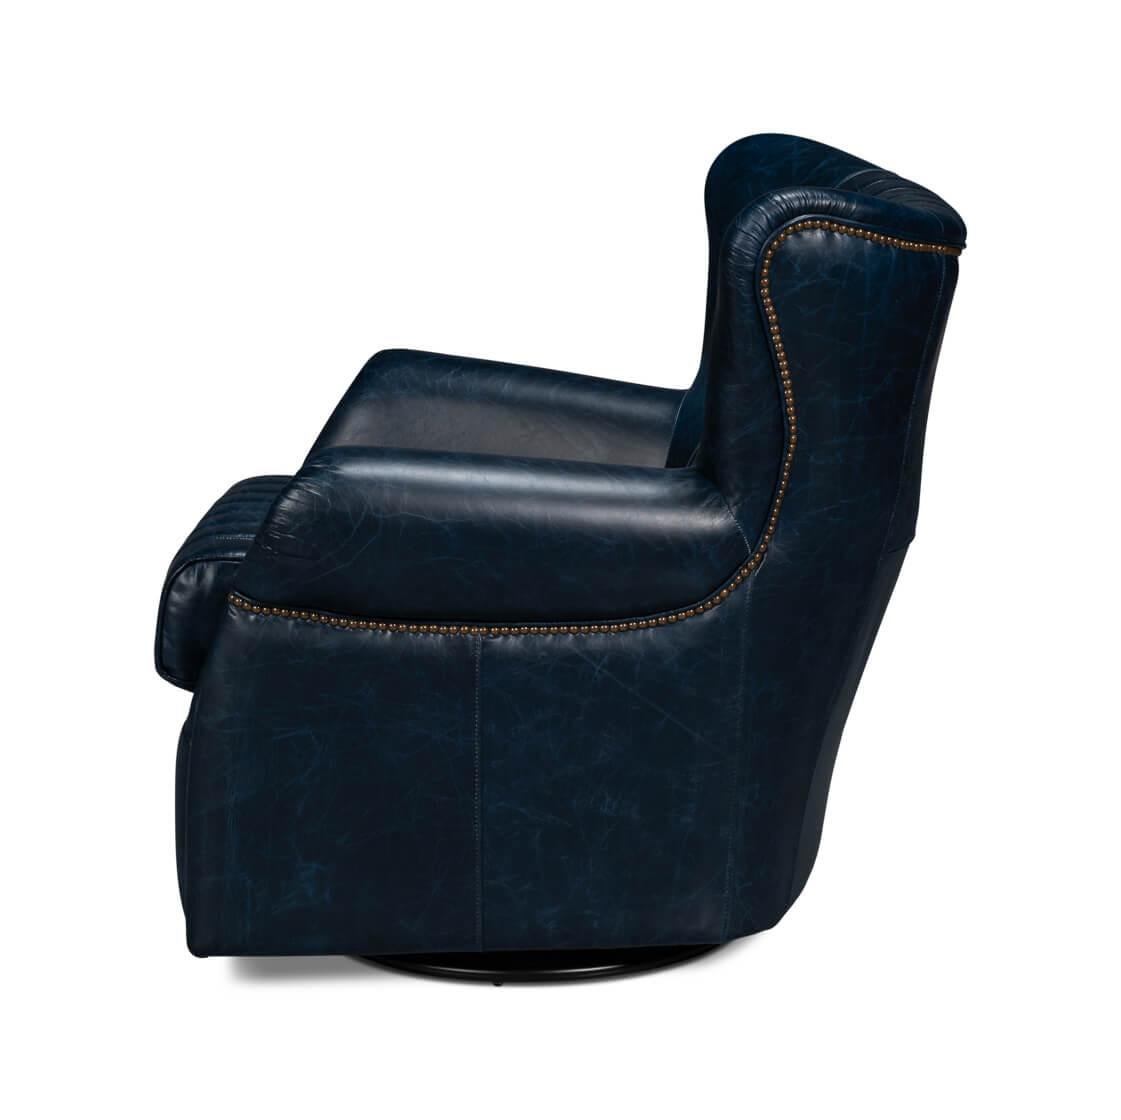 American Classical Classic Blue Leather Swivel Chair For Sale